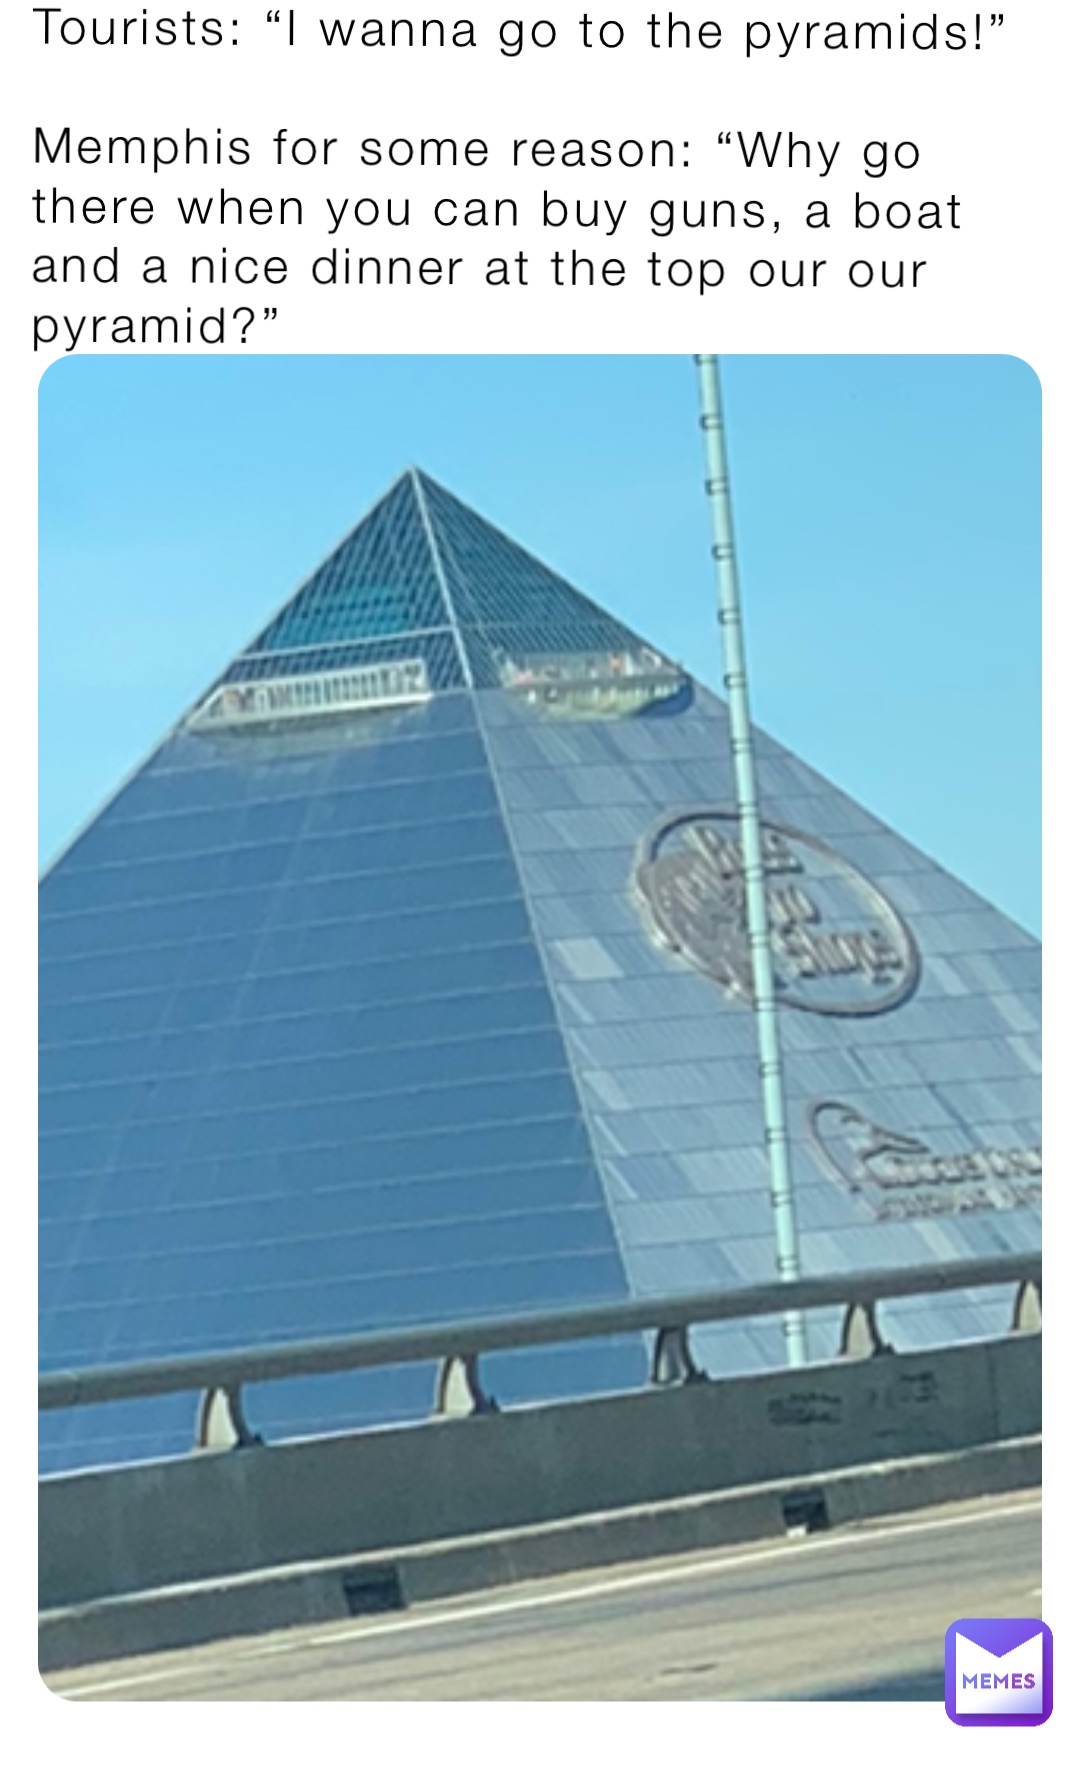 Tourists: “I wanna go to the pyramids!”

Memphis for some reason: “Why go there when you can buy guns, a boat and a nice dinner at the top our our pyramid?”